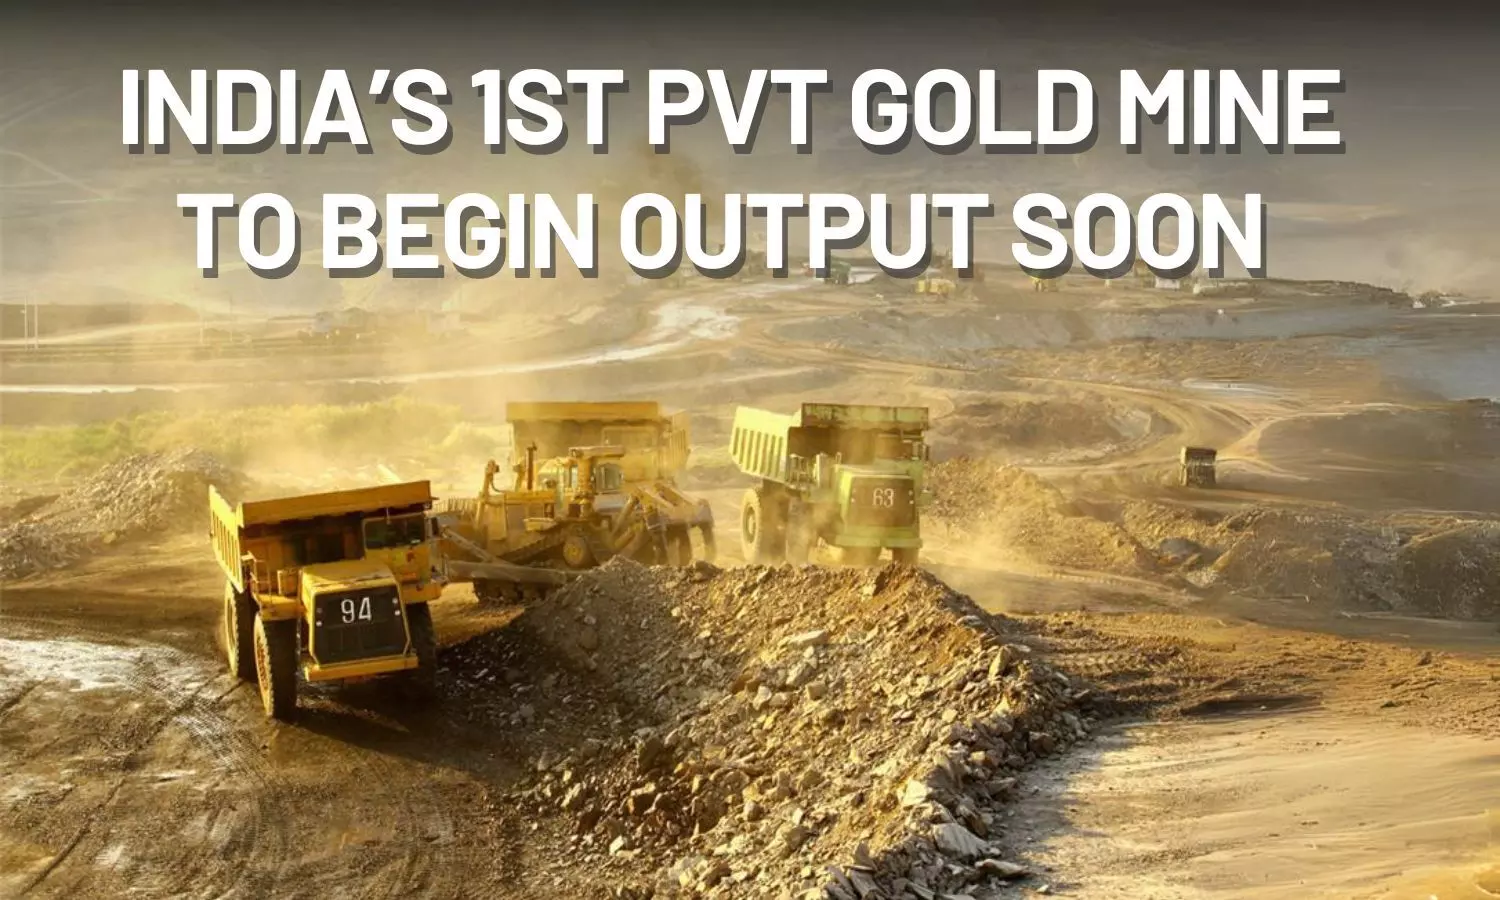 India 1st pvt gold mine to begin output soon